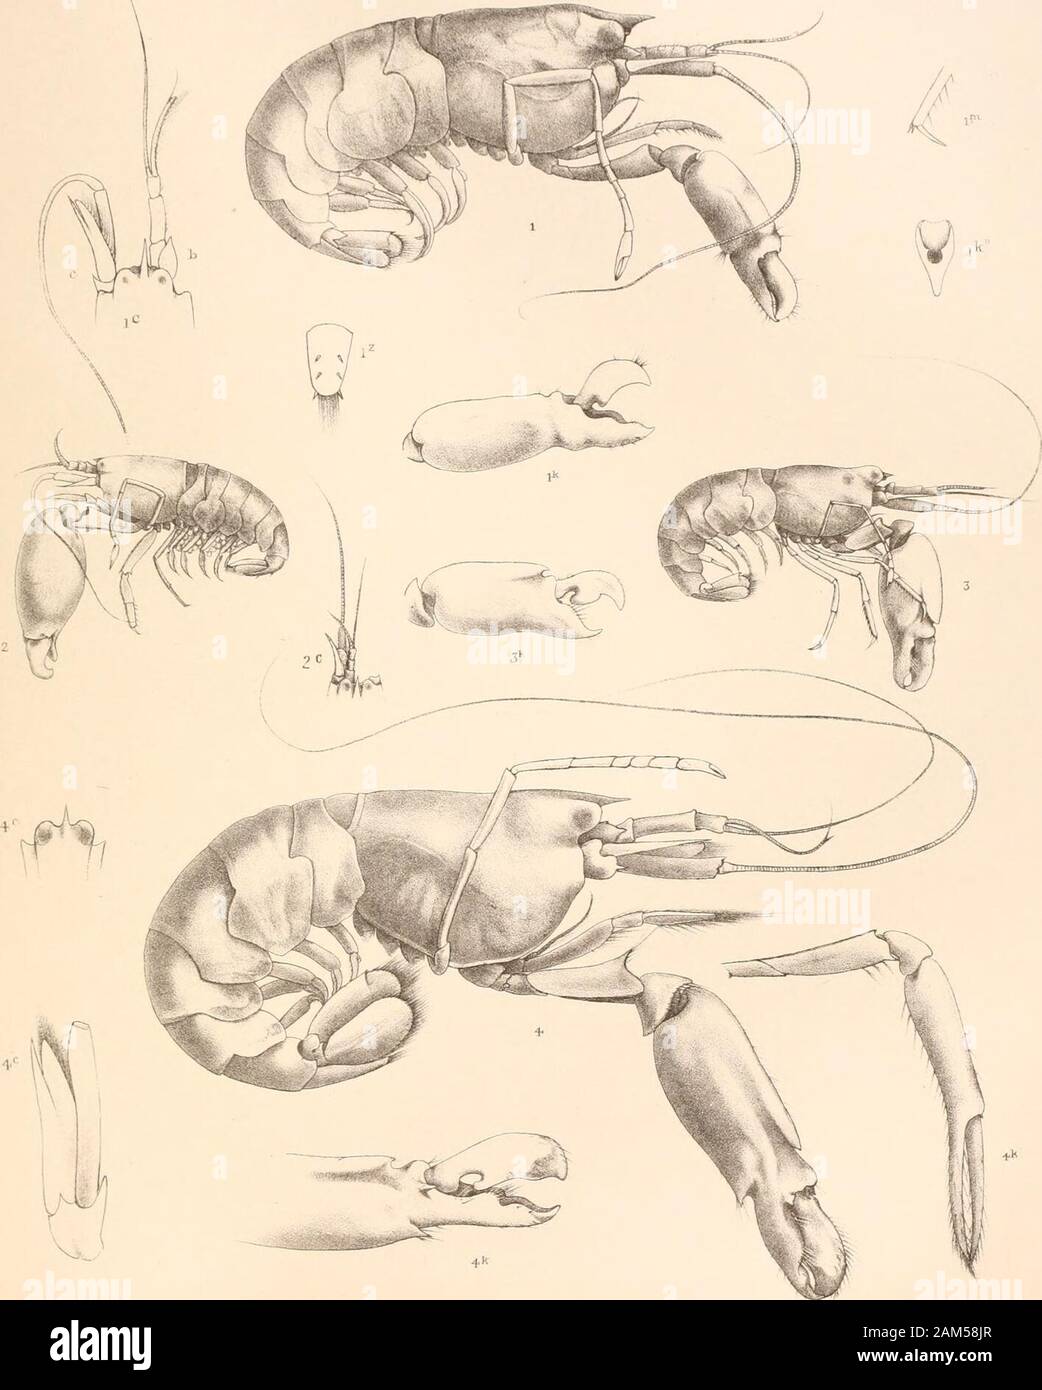 Report on the scientific results of the voyage of H.M.SChallenger during the years 1873-76 : under the command of Captain George SNares, R.N., F.R.Sand Captain Frank Turle Thomson, R.N. . PLATE XCVIII. Alpheus leviusculus, var. (p. 549).Fie. 1. Lateral view ; enlarged three times. lc. Cephalon ; b, first antenna ; c, second antenna.„ Ik. First pereiopod ; left side. W. First pereiopod ; left side, pollex.lm. Third pereiopod ; terminal joints.,, lz. Telson. Alpheus crinitus (p. 548).„ 2. Lateral view ; enlarged four times. 2c. Cephalon with first and second antennae ; left side. Alpheus bermud Stock Photo